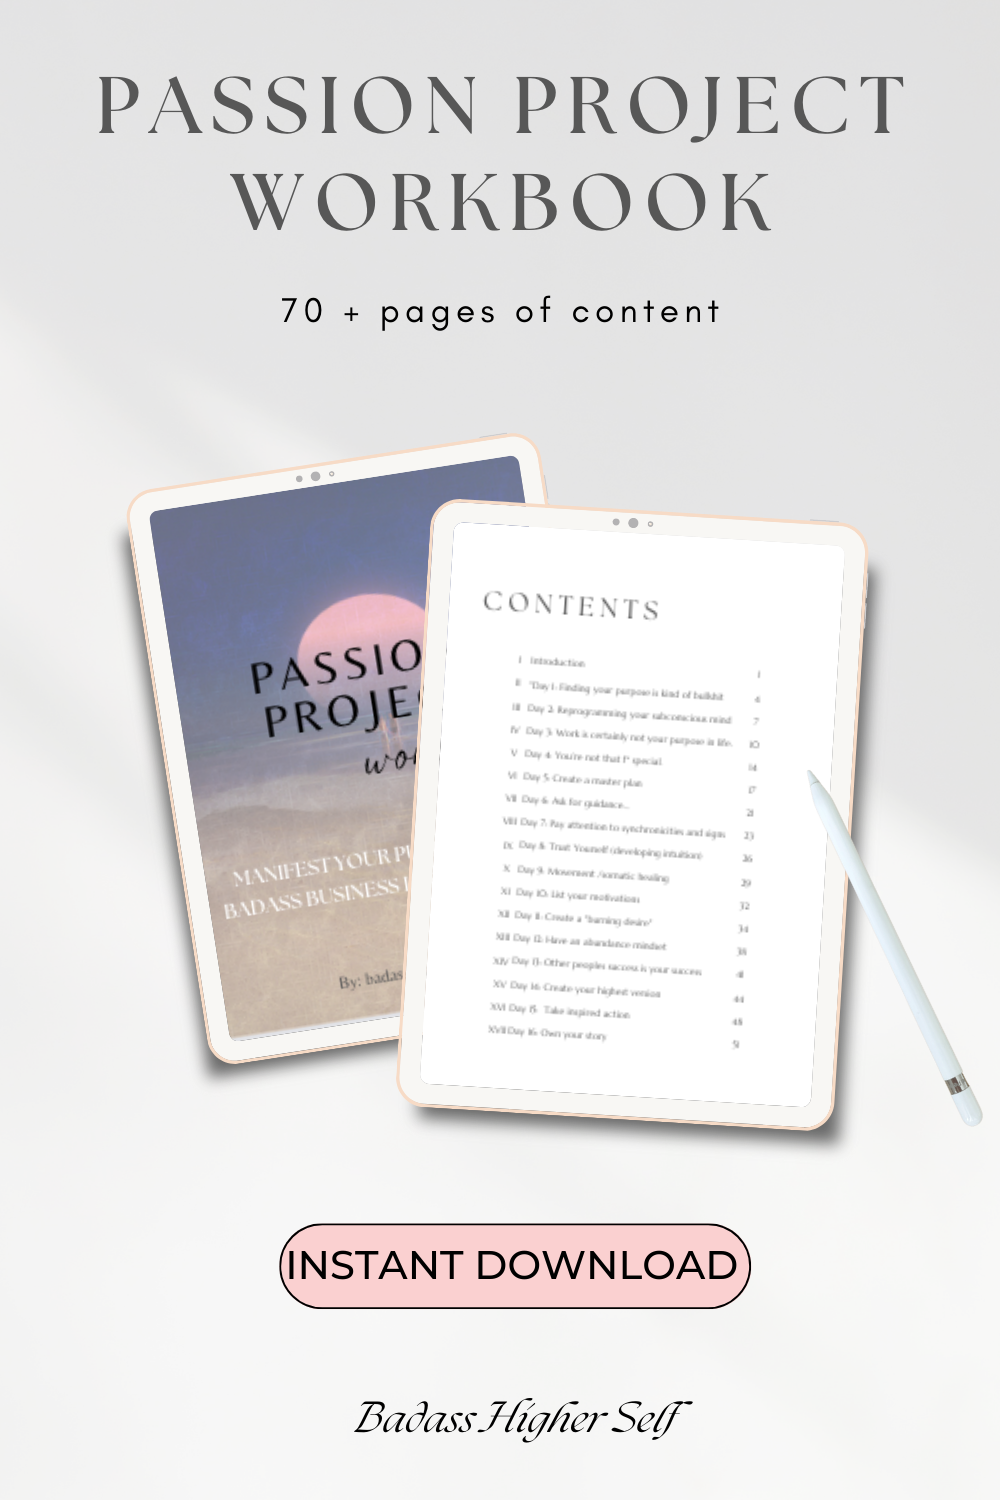 Passion Project Workbook - Manifest your purpose & uncover your divine gifts in 21 days!